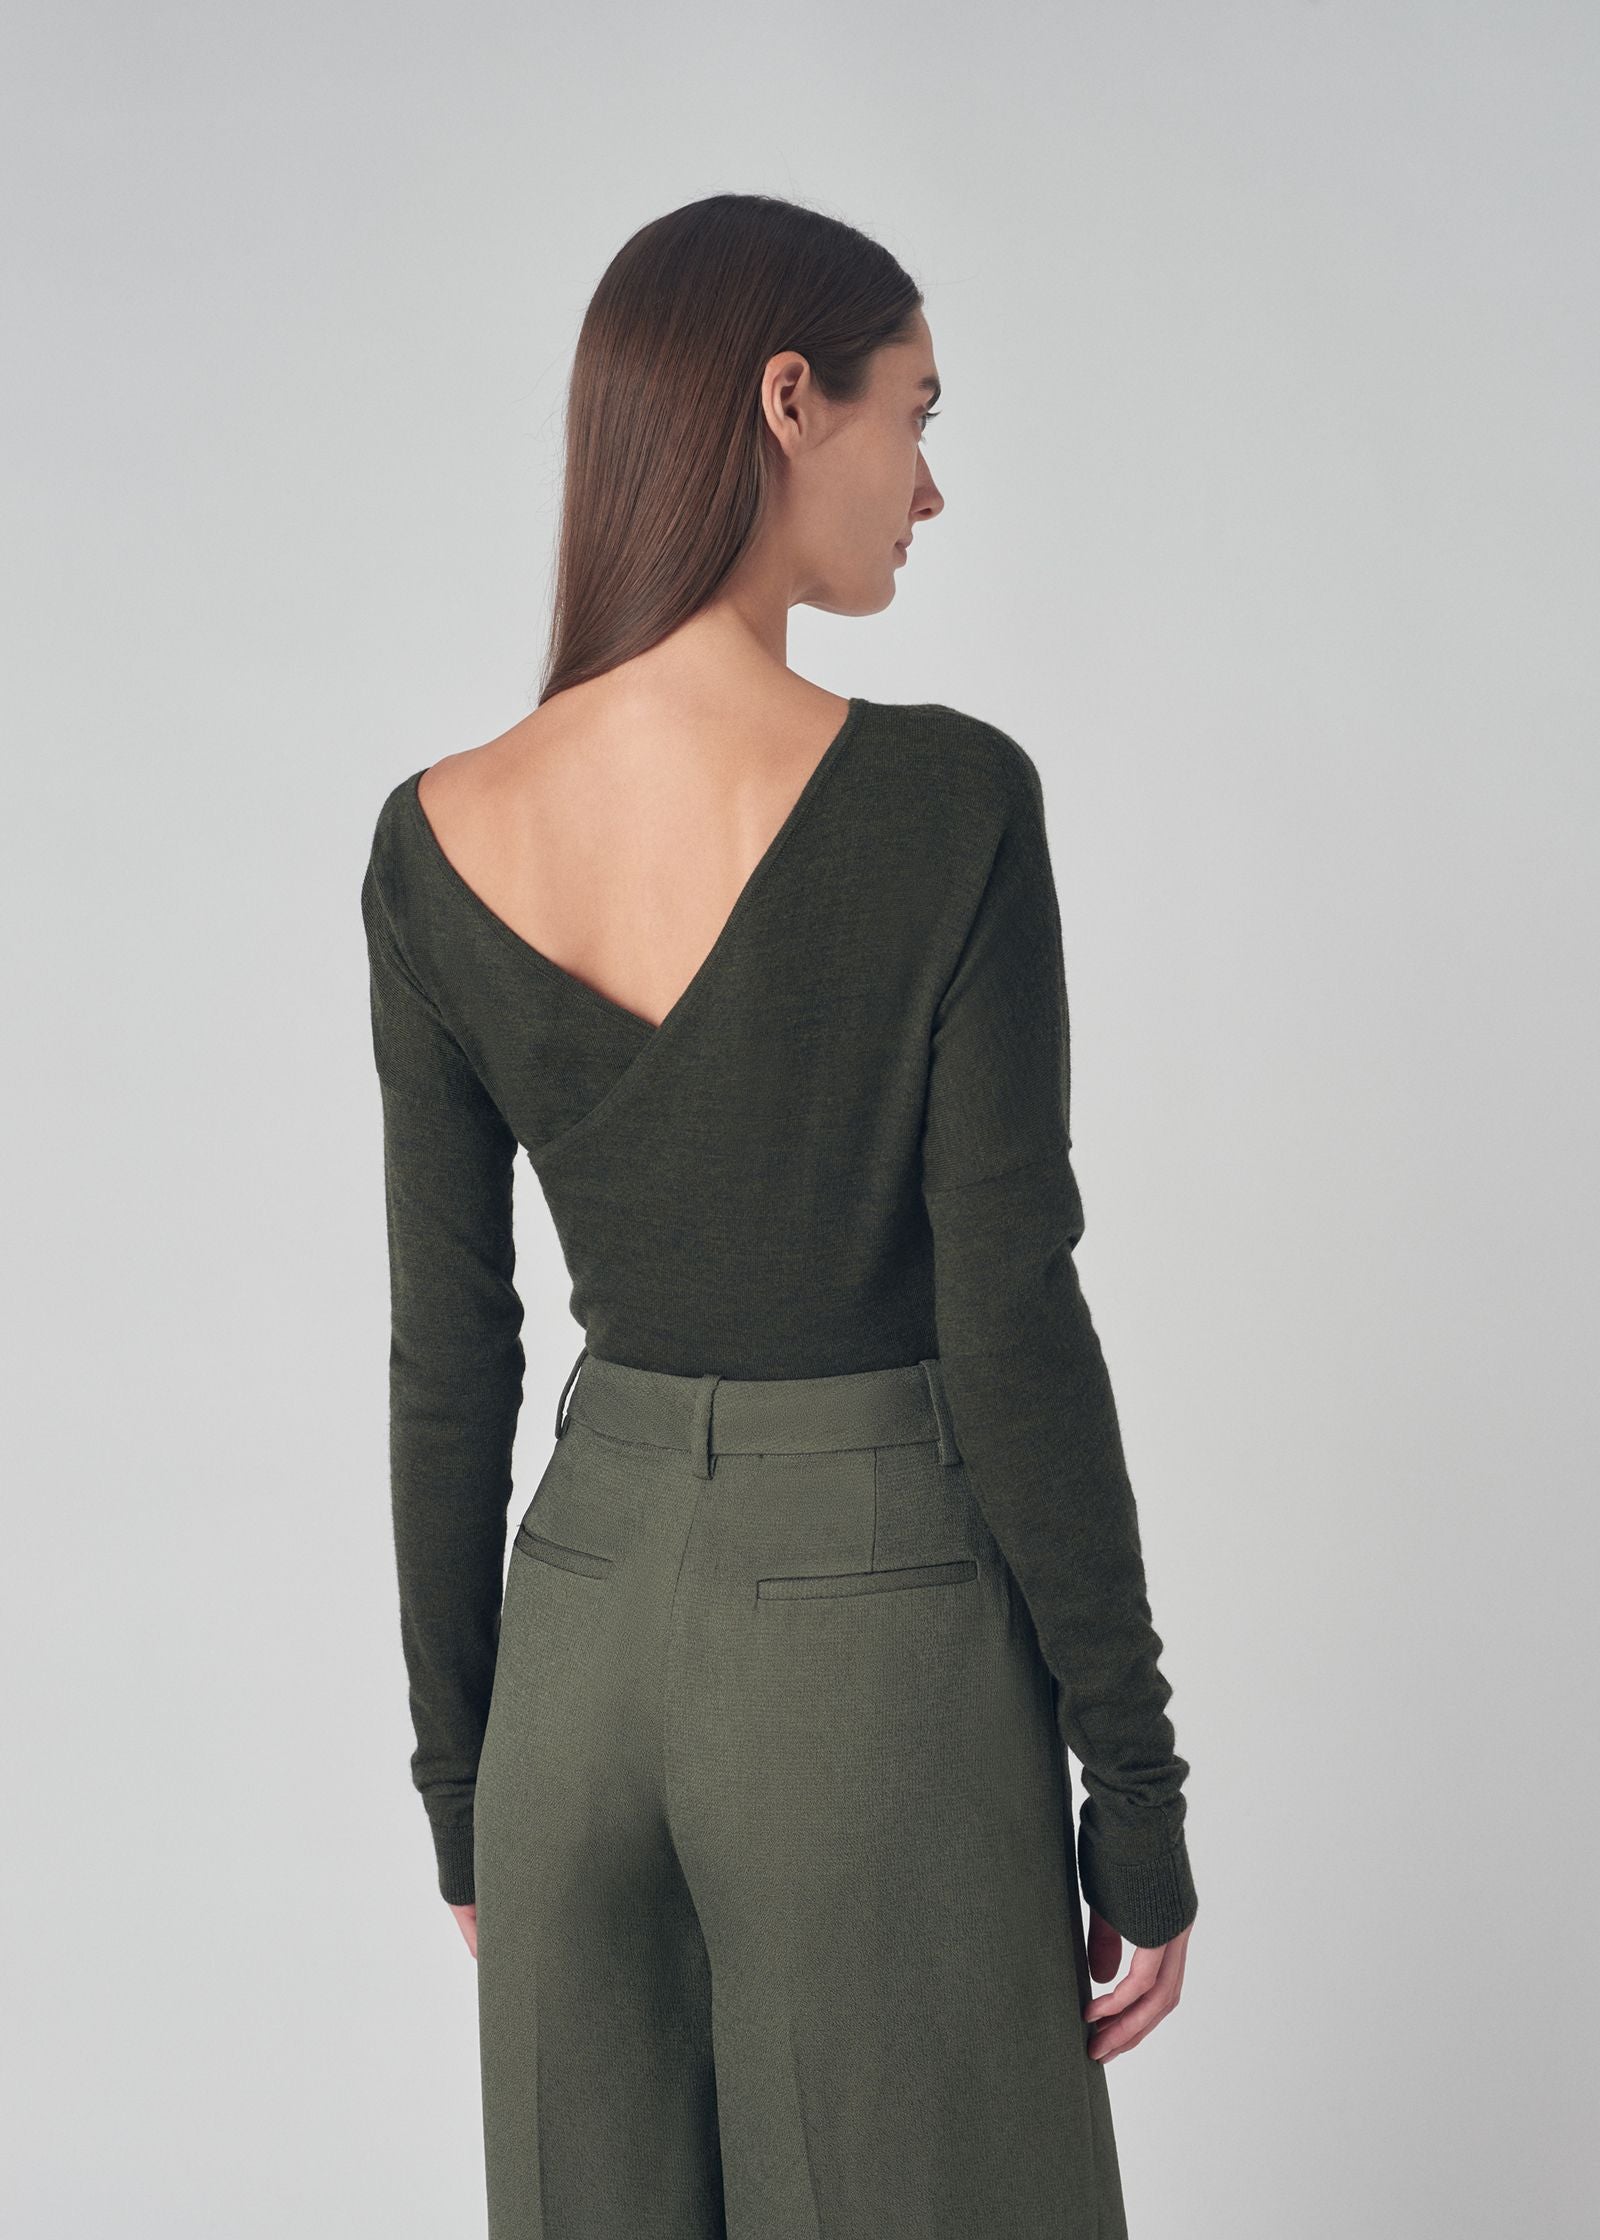 Ballet Top in Fine Merino Wool Knit- Green - CO Collections